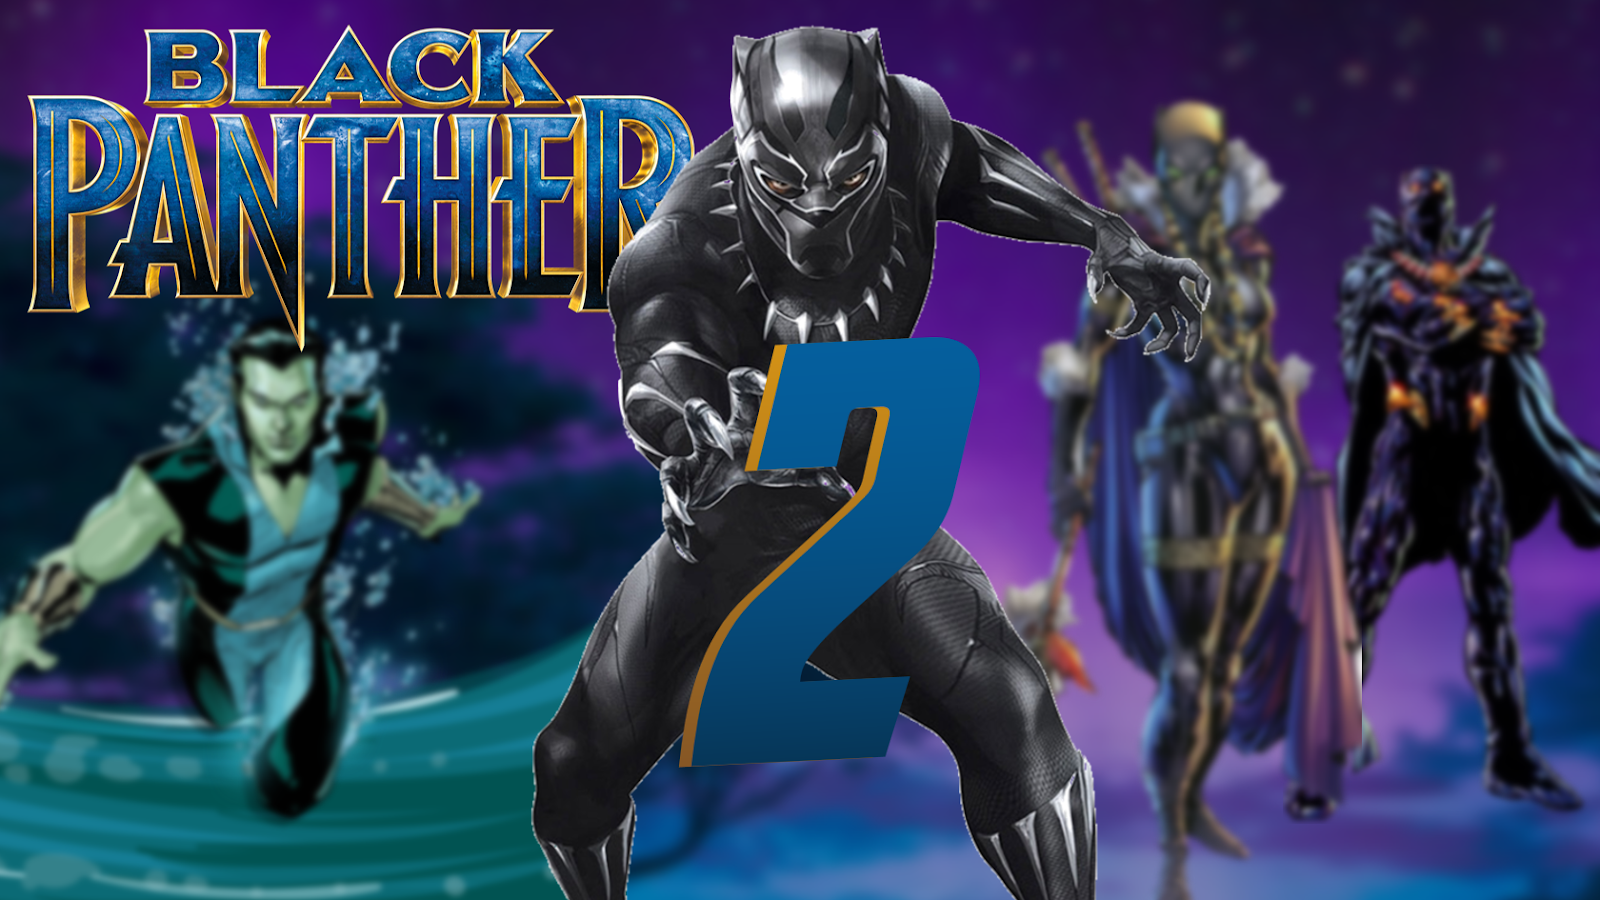 BLACK PANTHER 2 THINGS TO SEE